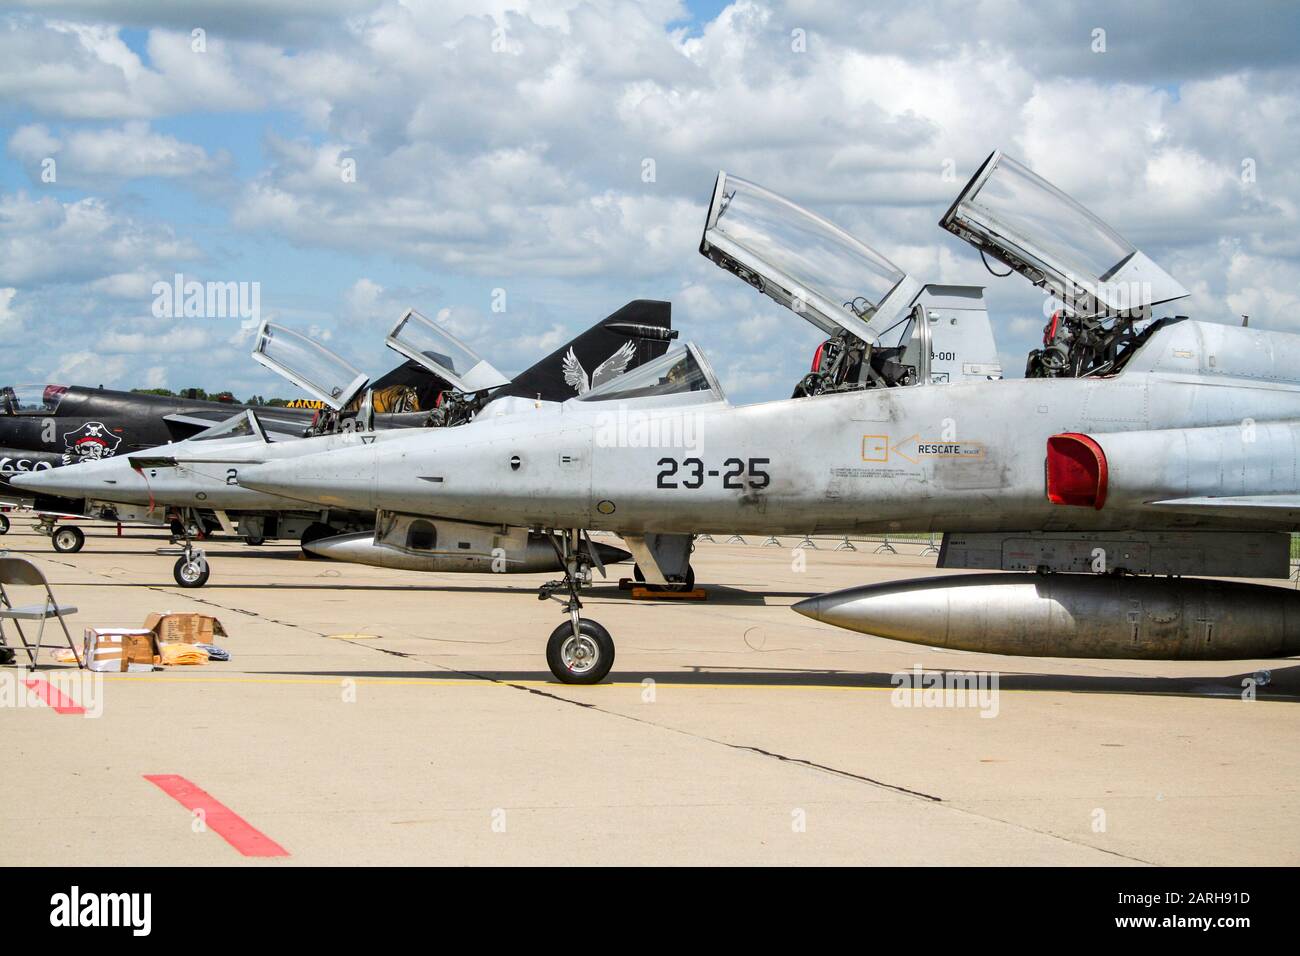 FLORENNES, BELGIUM - JUL 6, 2008: Spanish Air Force F-5 Tiger fighter jet planeon the tarmac of Florennes airbase Stock Photo